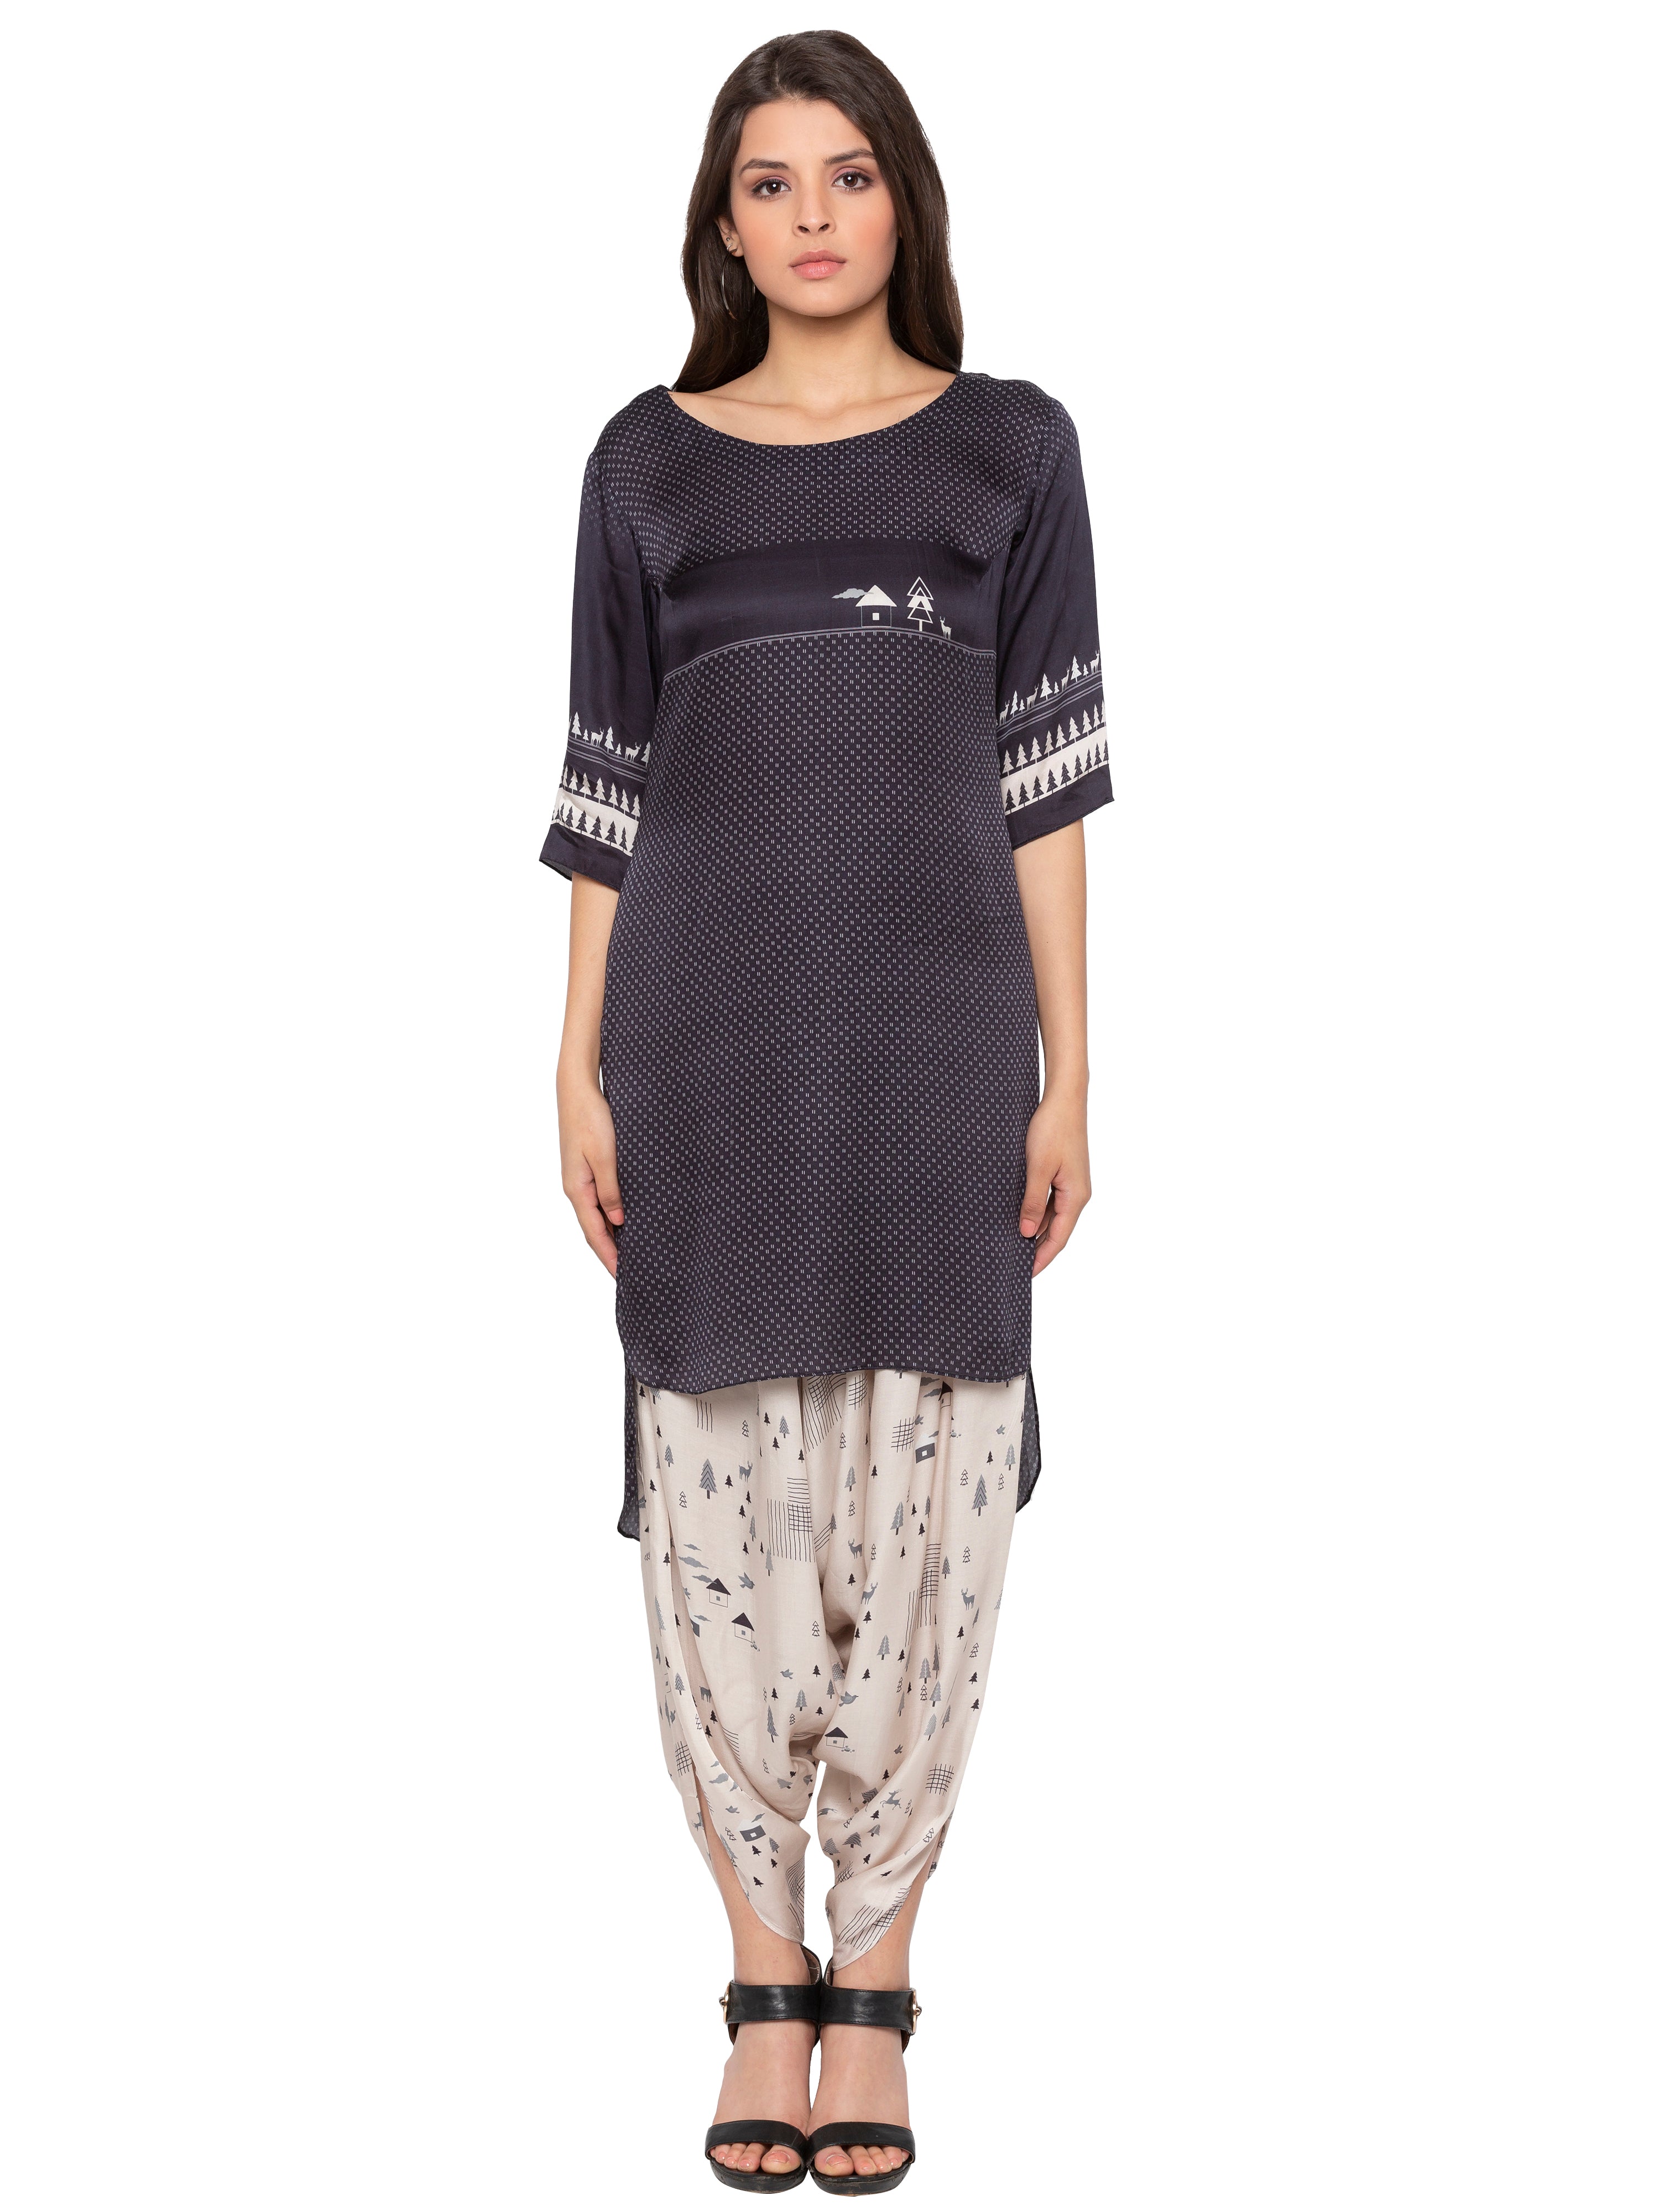 Tree Printed Top Paired With Dhoti Pants